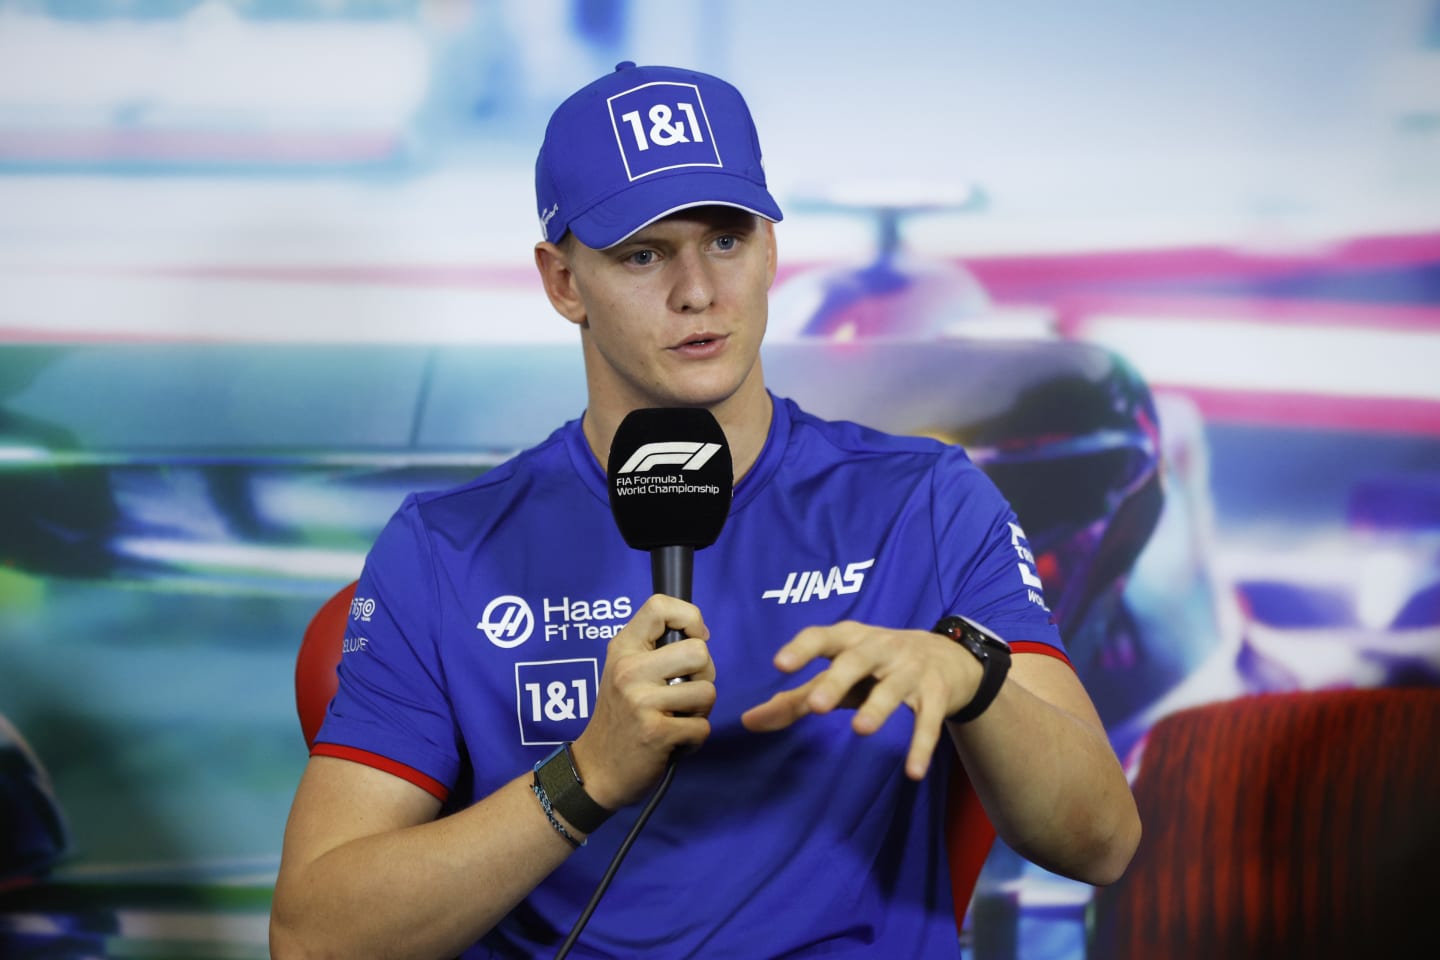 MEXICO CITY, MEXICO - OCTOBER 27: Mick Schumacher of Germany and Haas F1 attends the Drivers Press Conference during previews ahead of the F1 Grand Prix of Mexico at Autodromo Hermanos Rodriguez on October 27, 2022 in Mexico City, Mexico. (Photo by Jared C. Tilton/Getty Images)